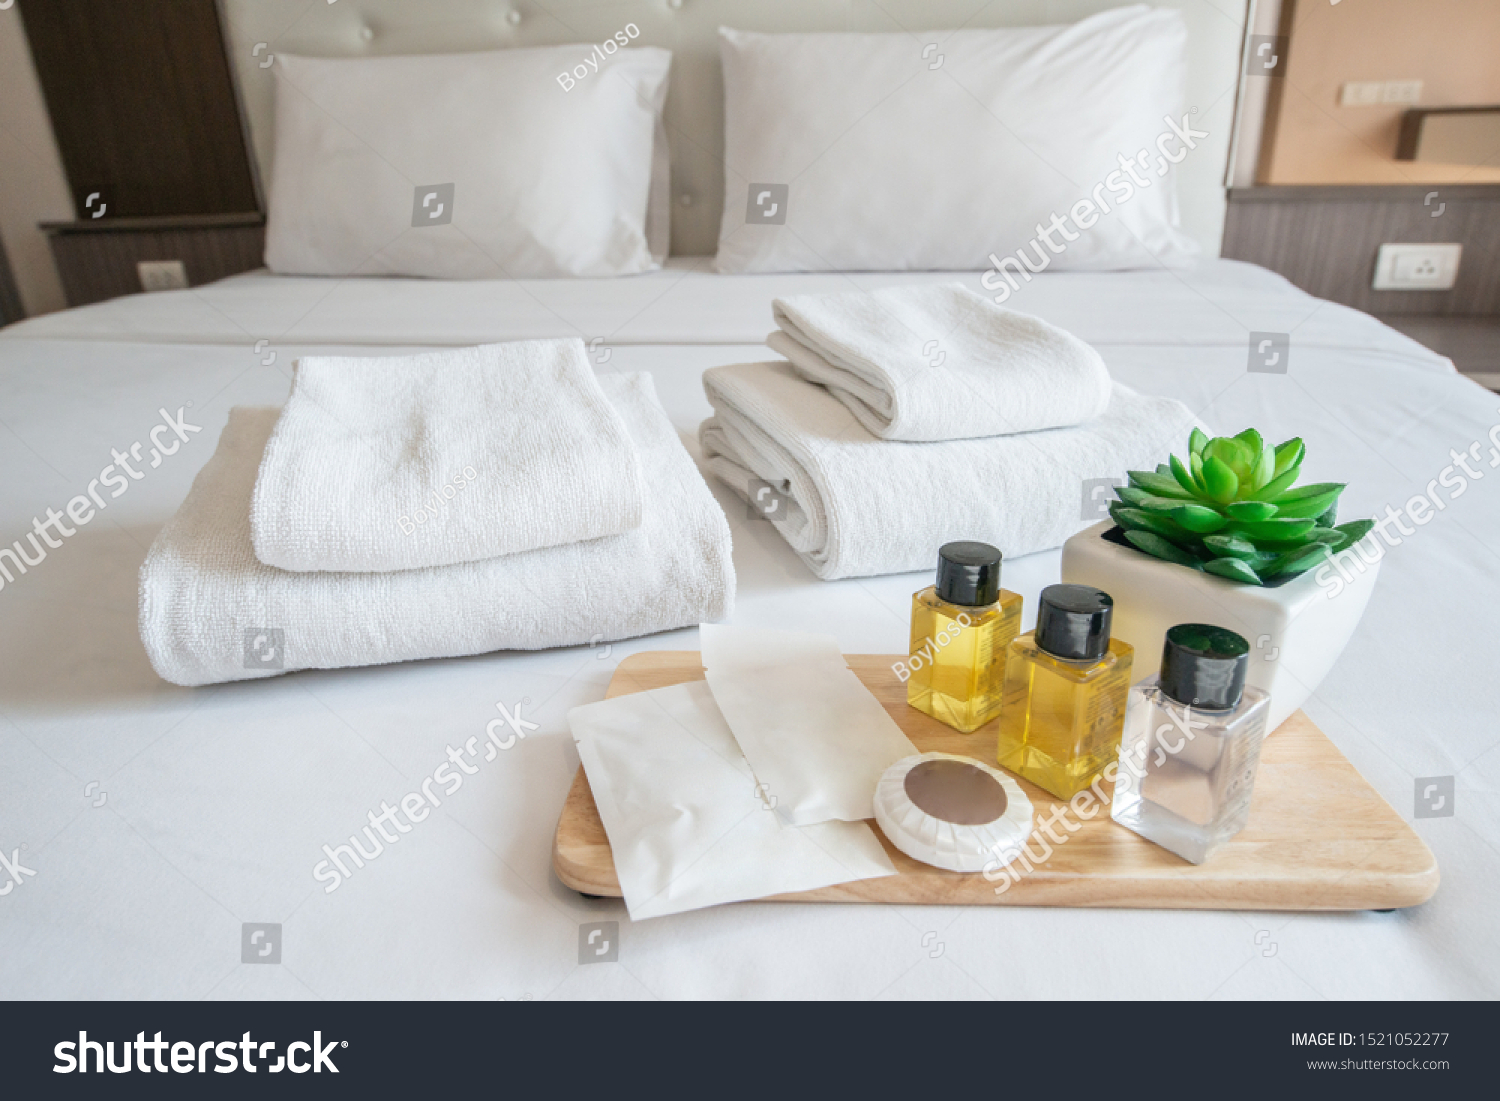 Set of hotel amenities (such as towels, shampoo, soap, gel etc) on the bed. Hotel amenities is something of a premium nature provided in addition to the room when renting a room. #1521052277